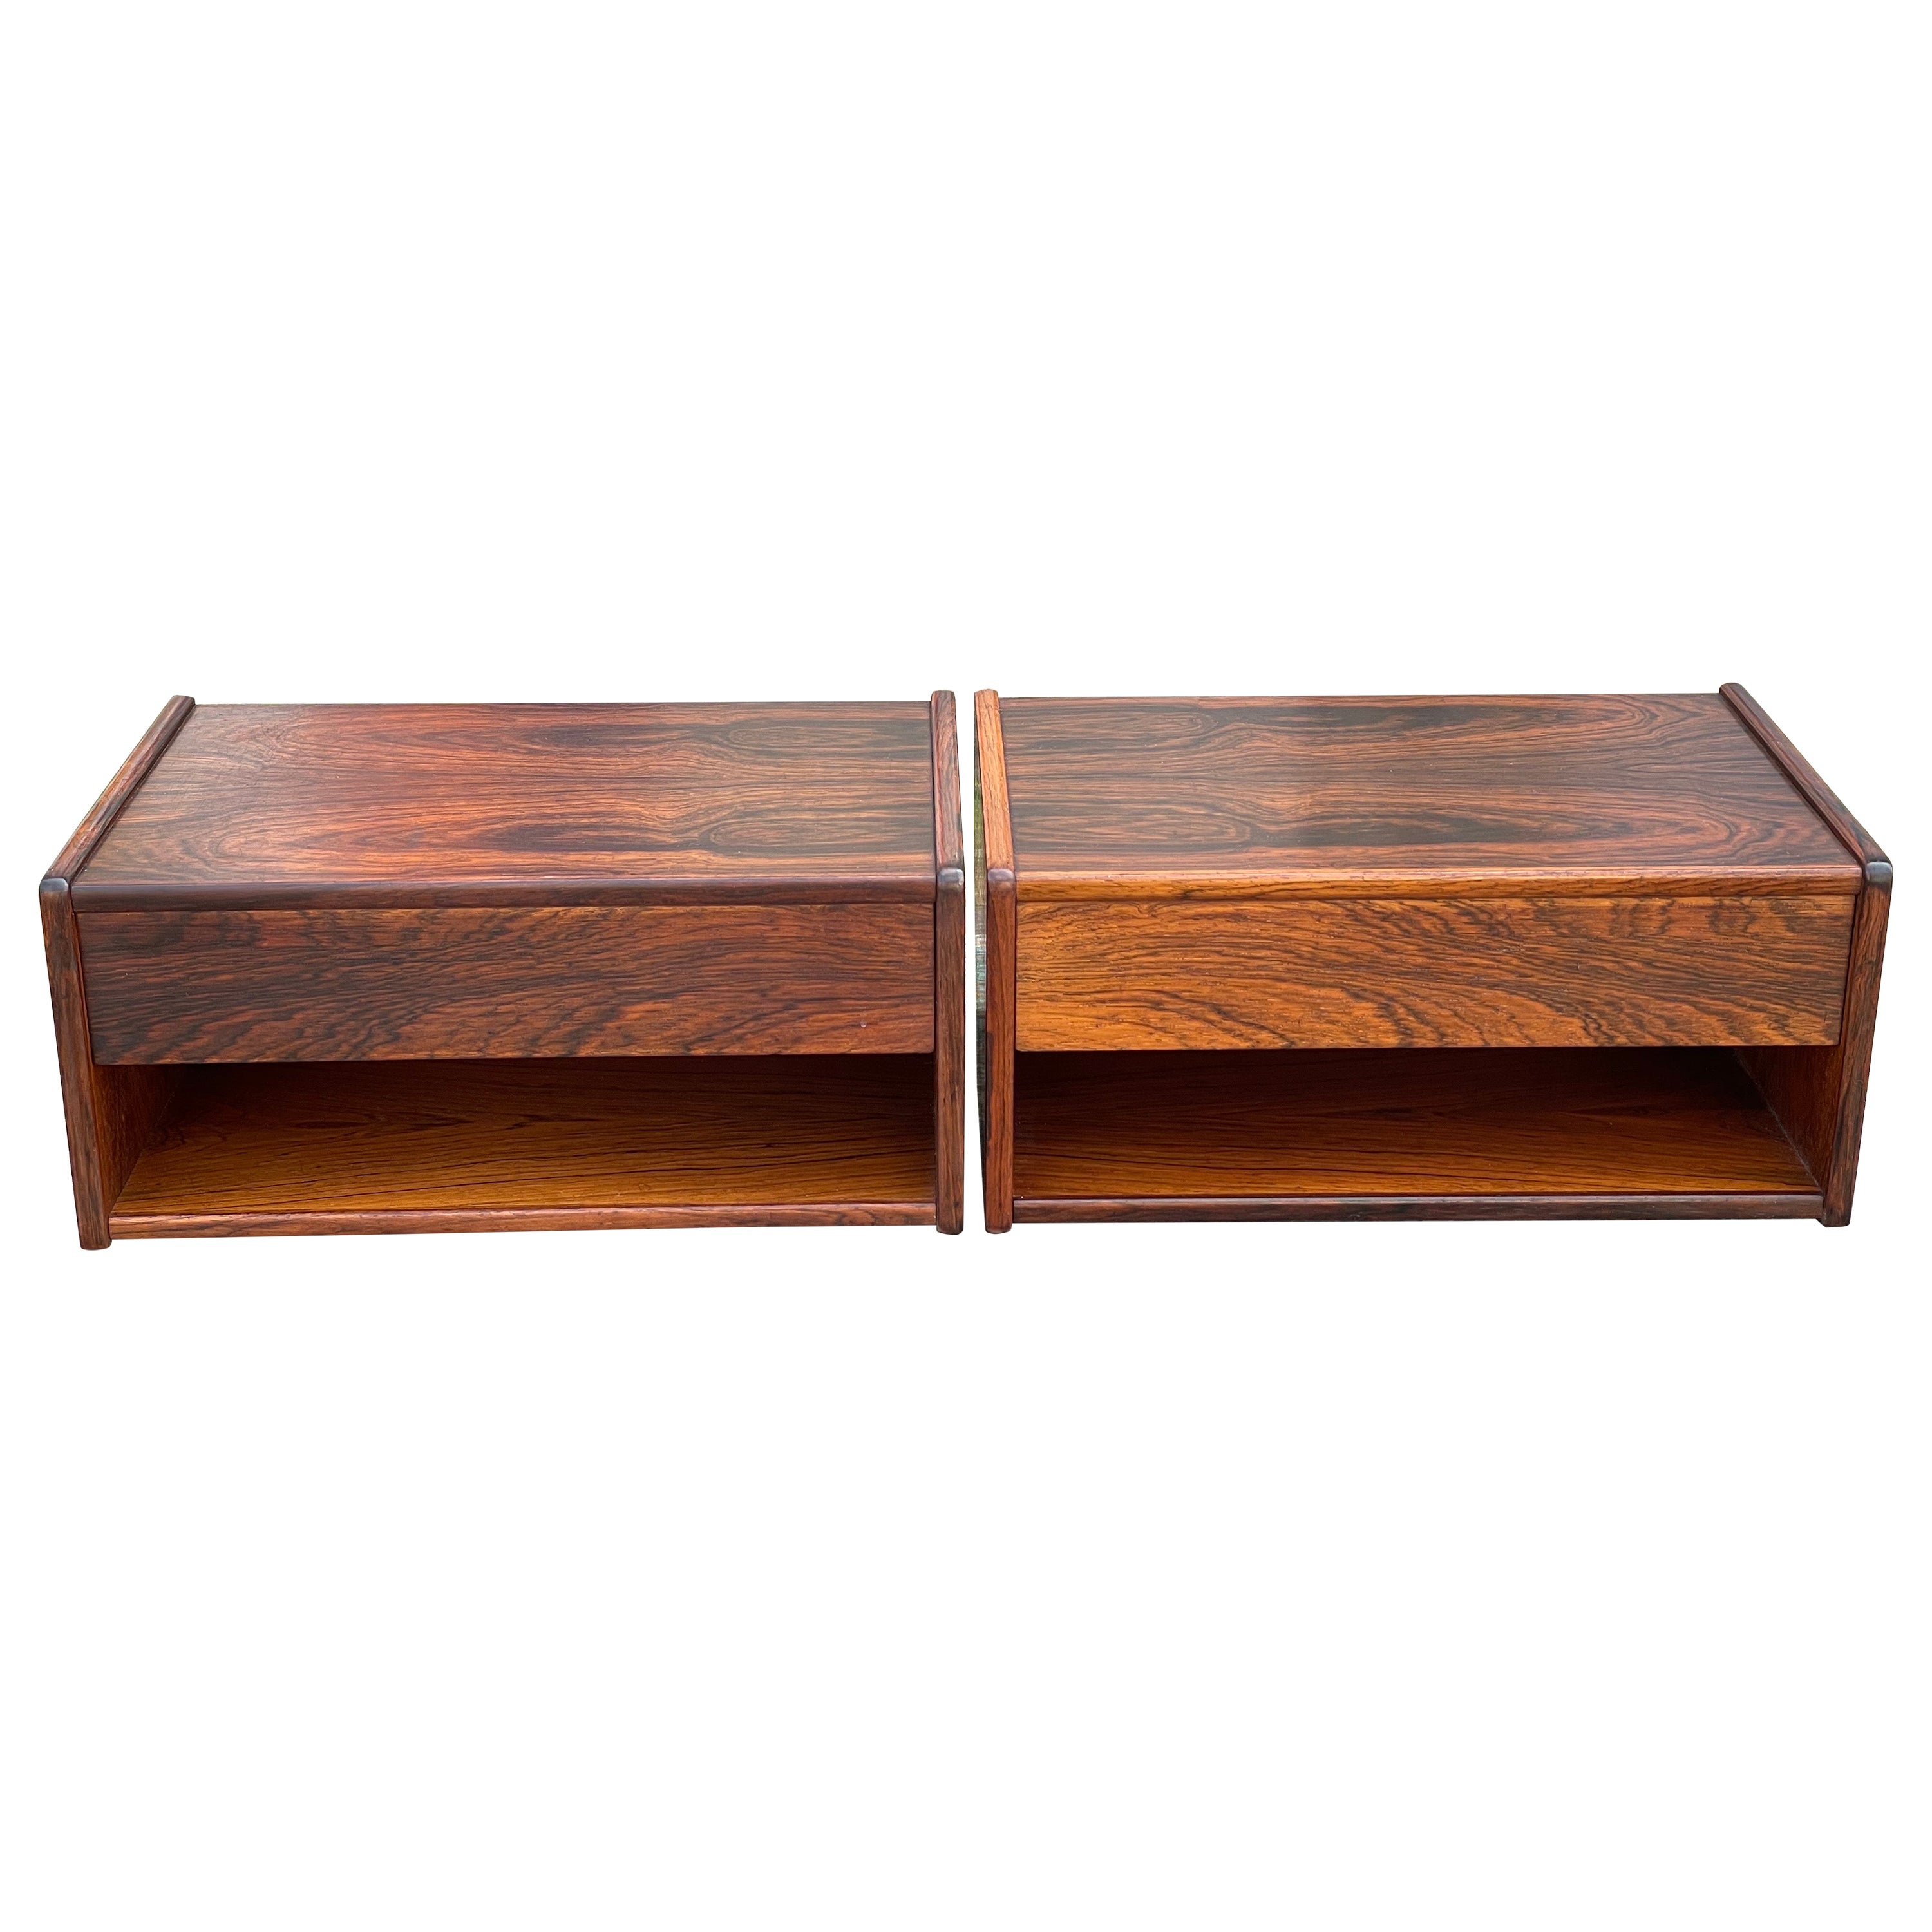 Stunning Set of Danish Mid-Century Modern Floating Nightstands from the, 1960s For Sale